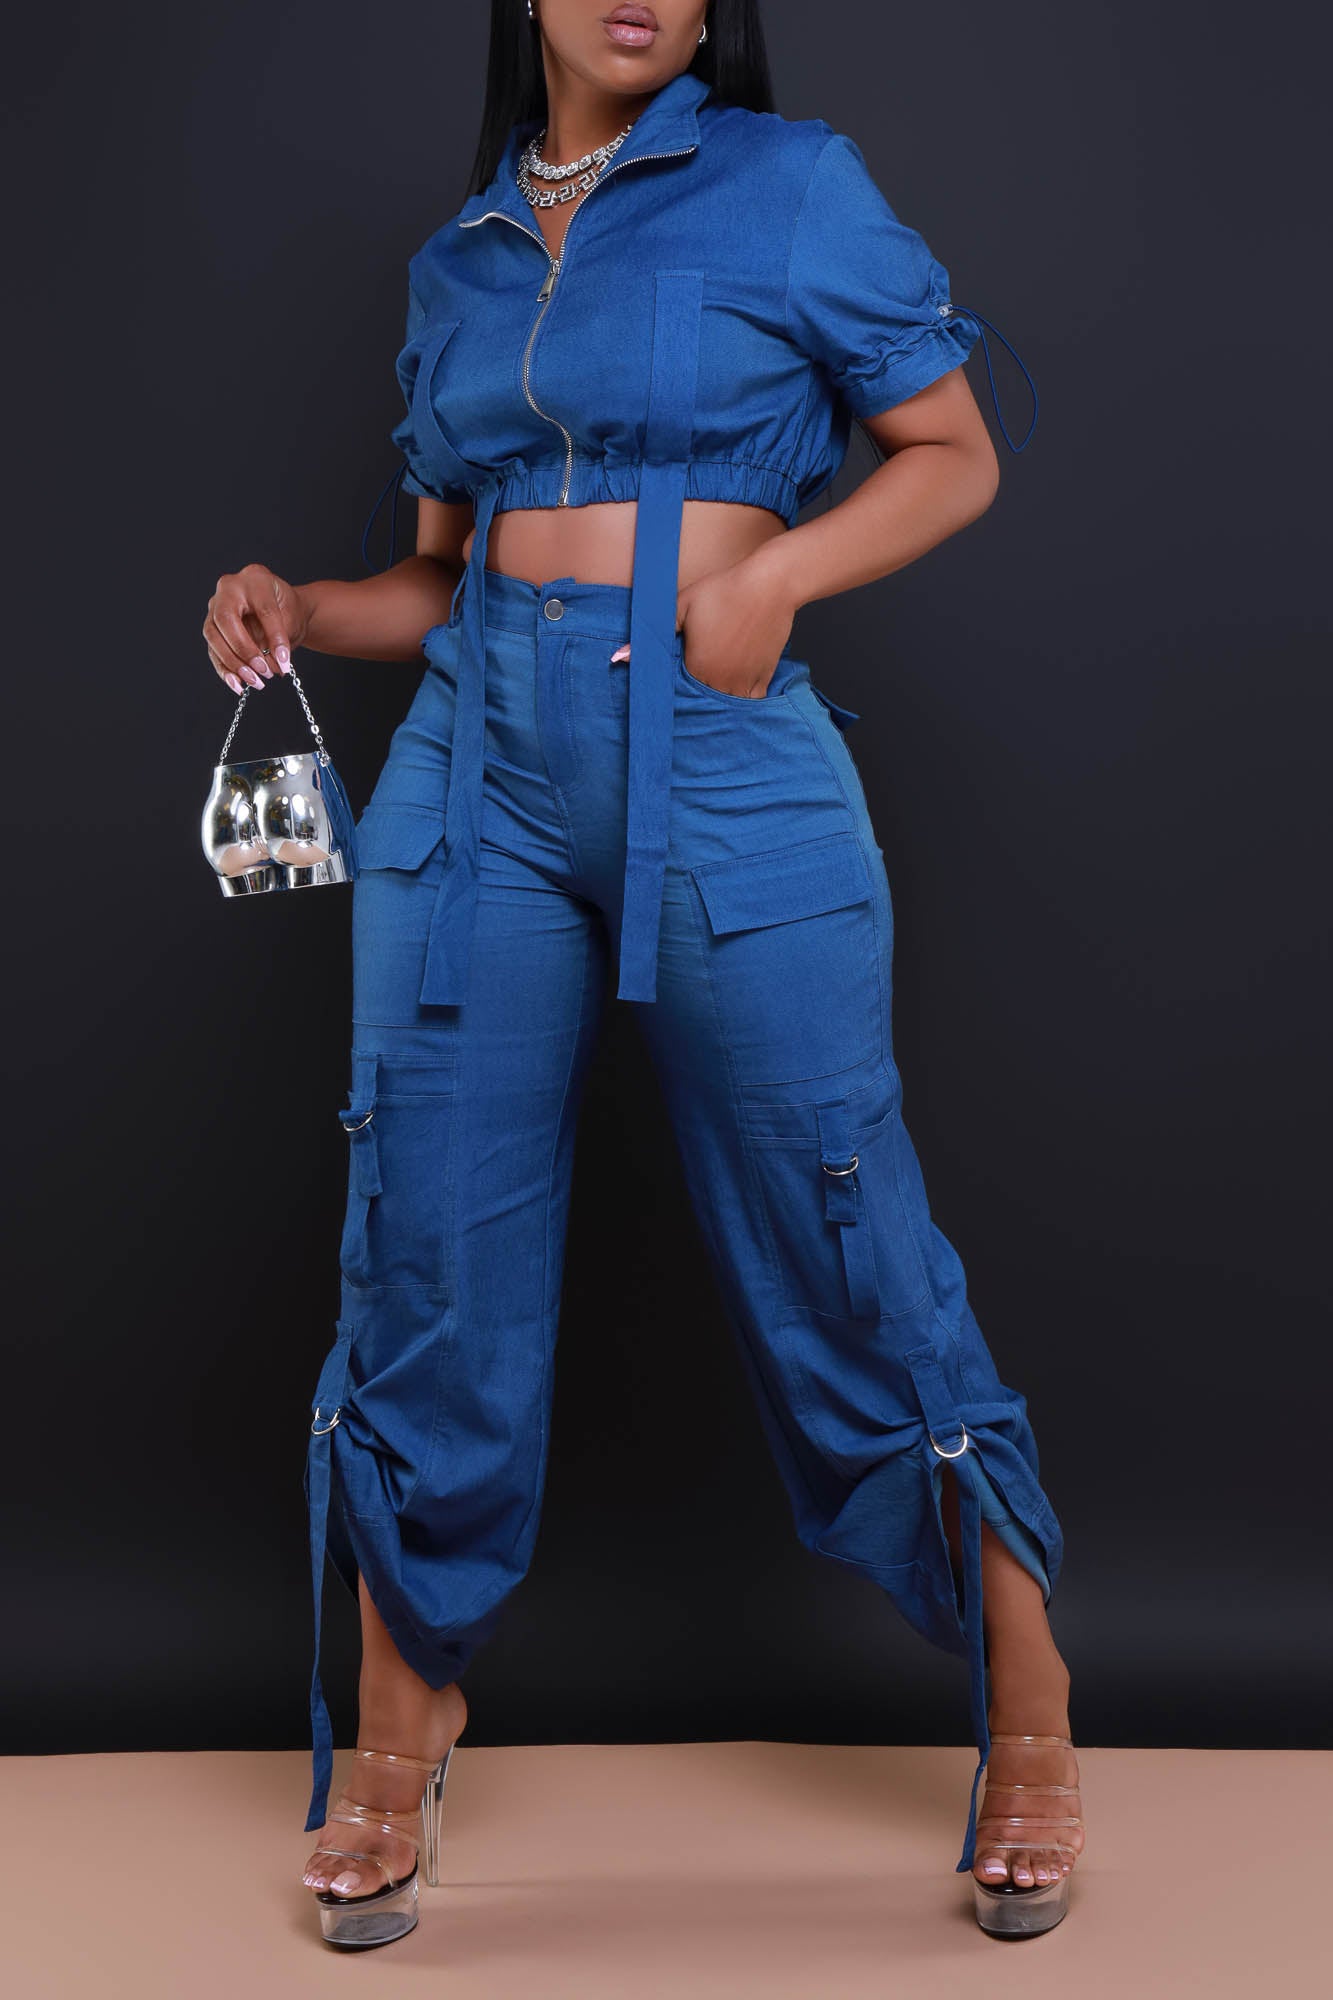 Blue Denim Denim Two Piece Dress Set With Low Cut Straps And Bodycon Skirts  Womens Streetwear Jeans, Bustier Crop Top And Mini Bodynet Perfect For  Clubwear P230517 From Mengqiqi04, $15.11 | DHgate.Com